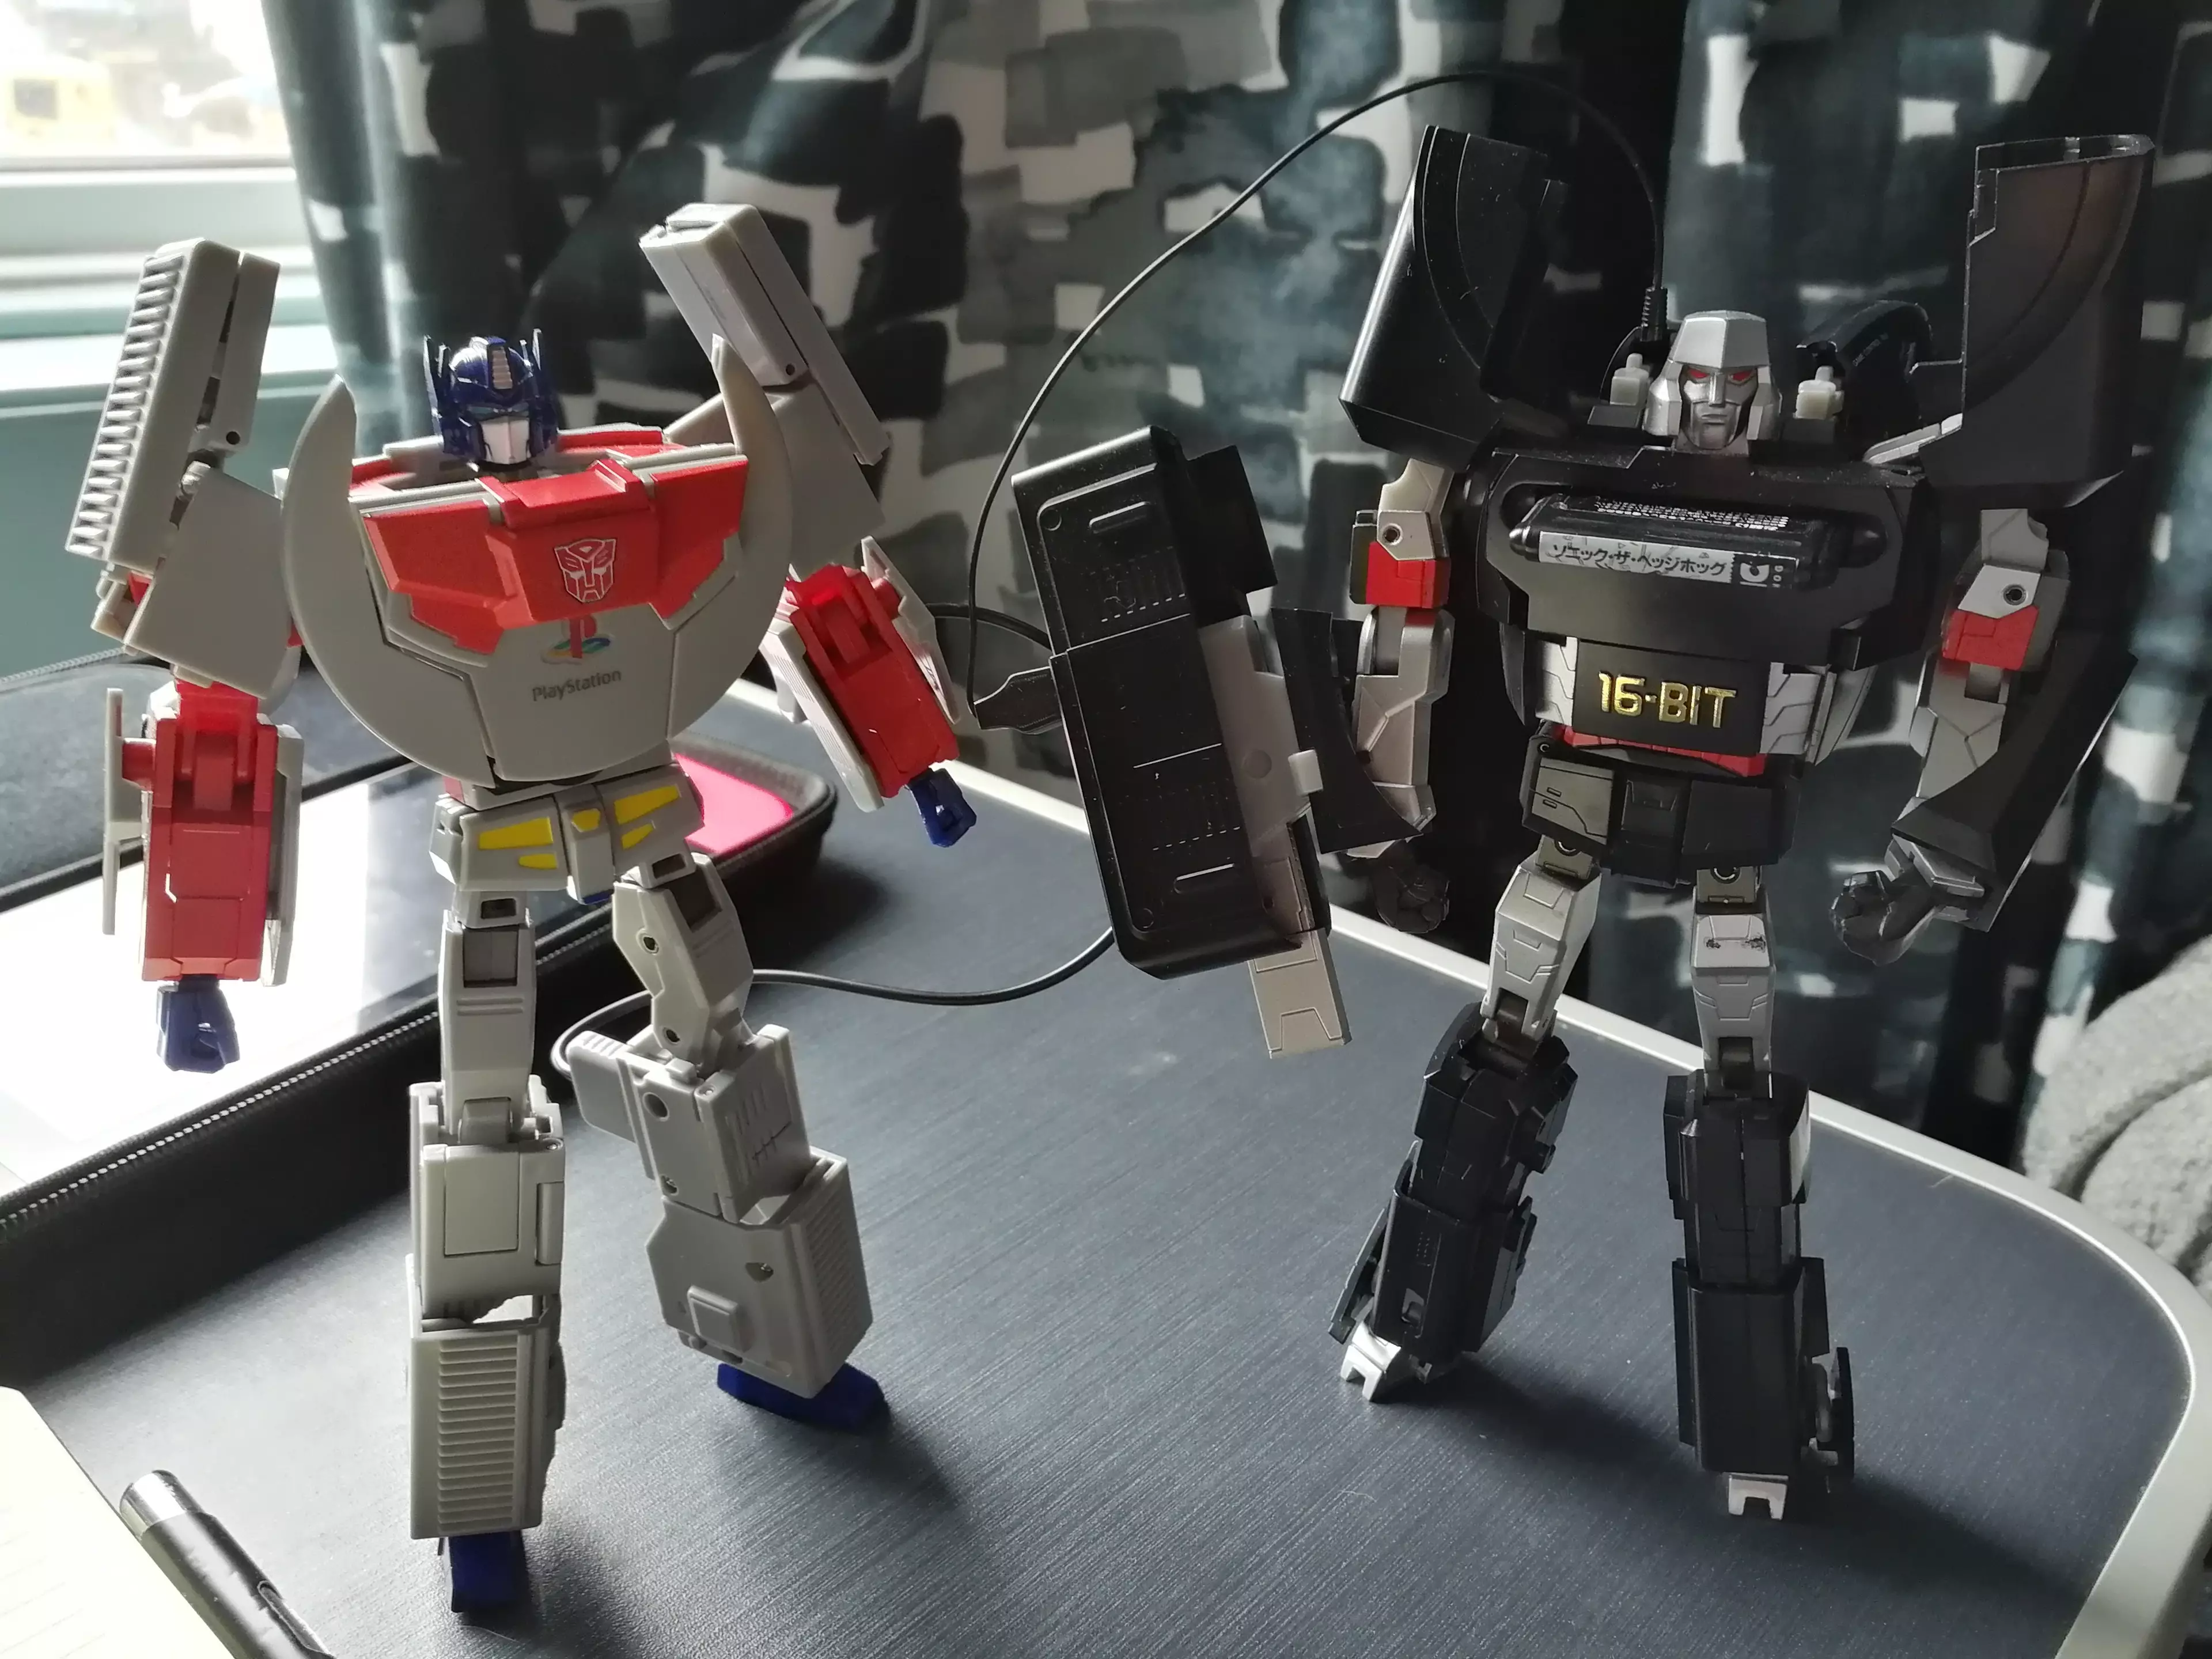 Both console bots, about to either battle or simply fall over